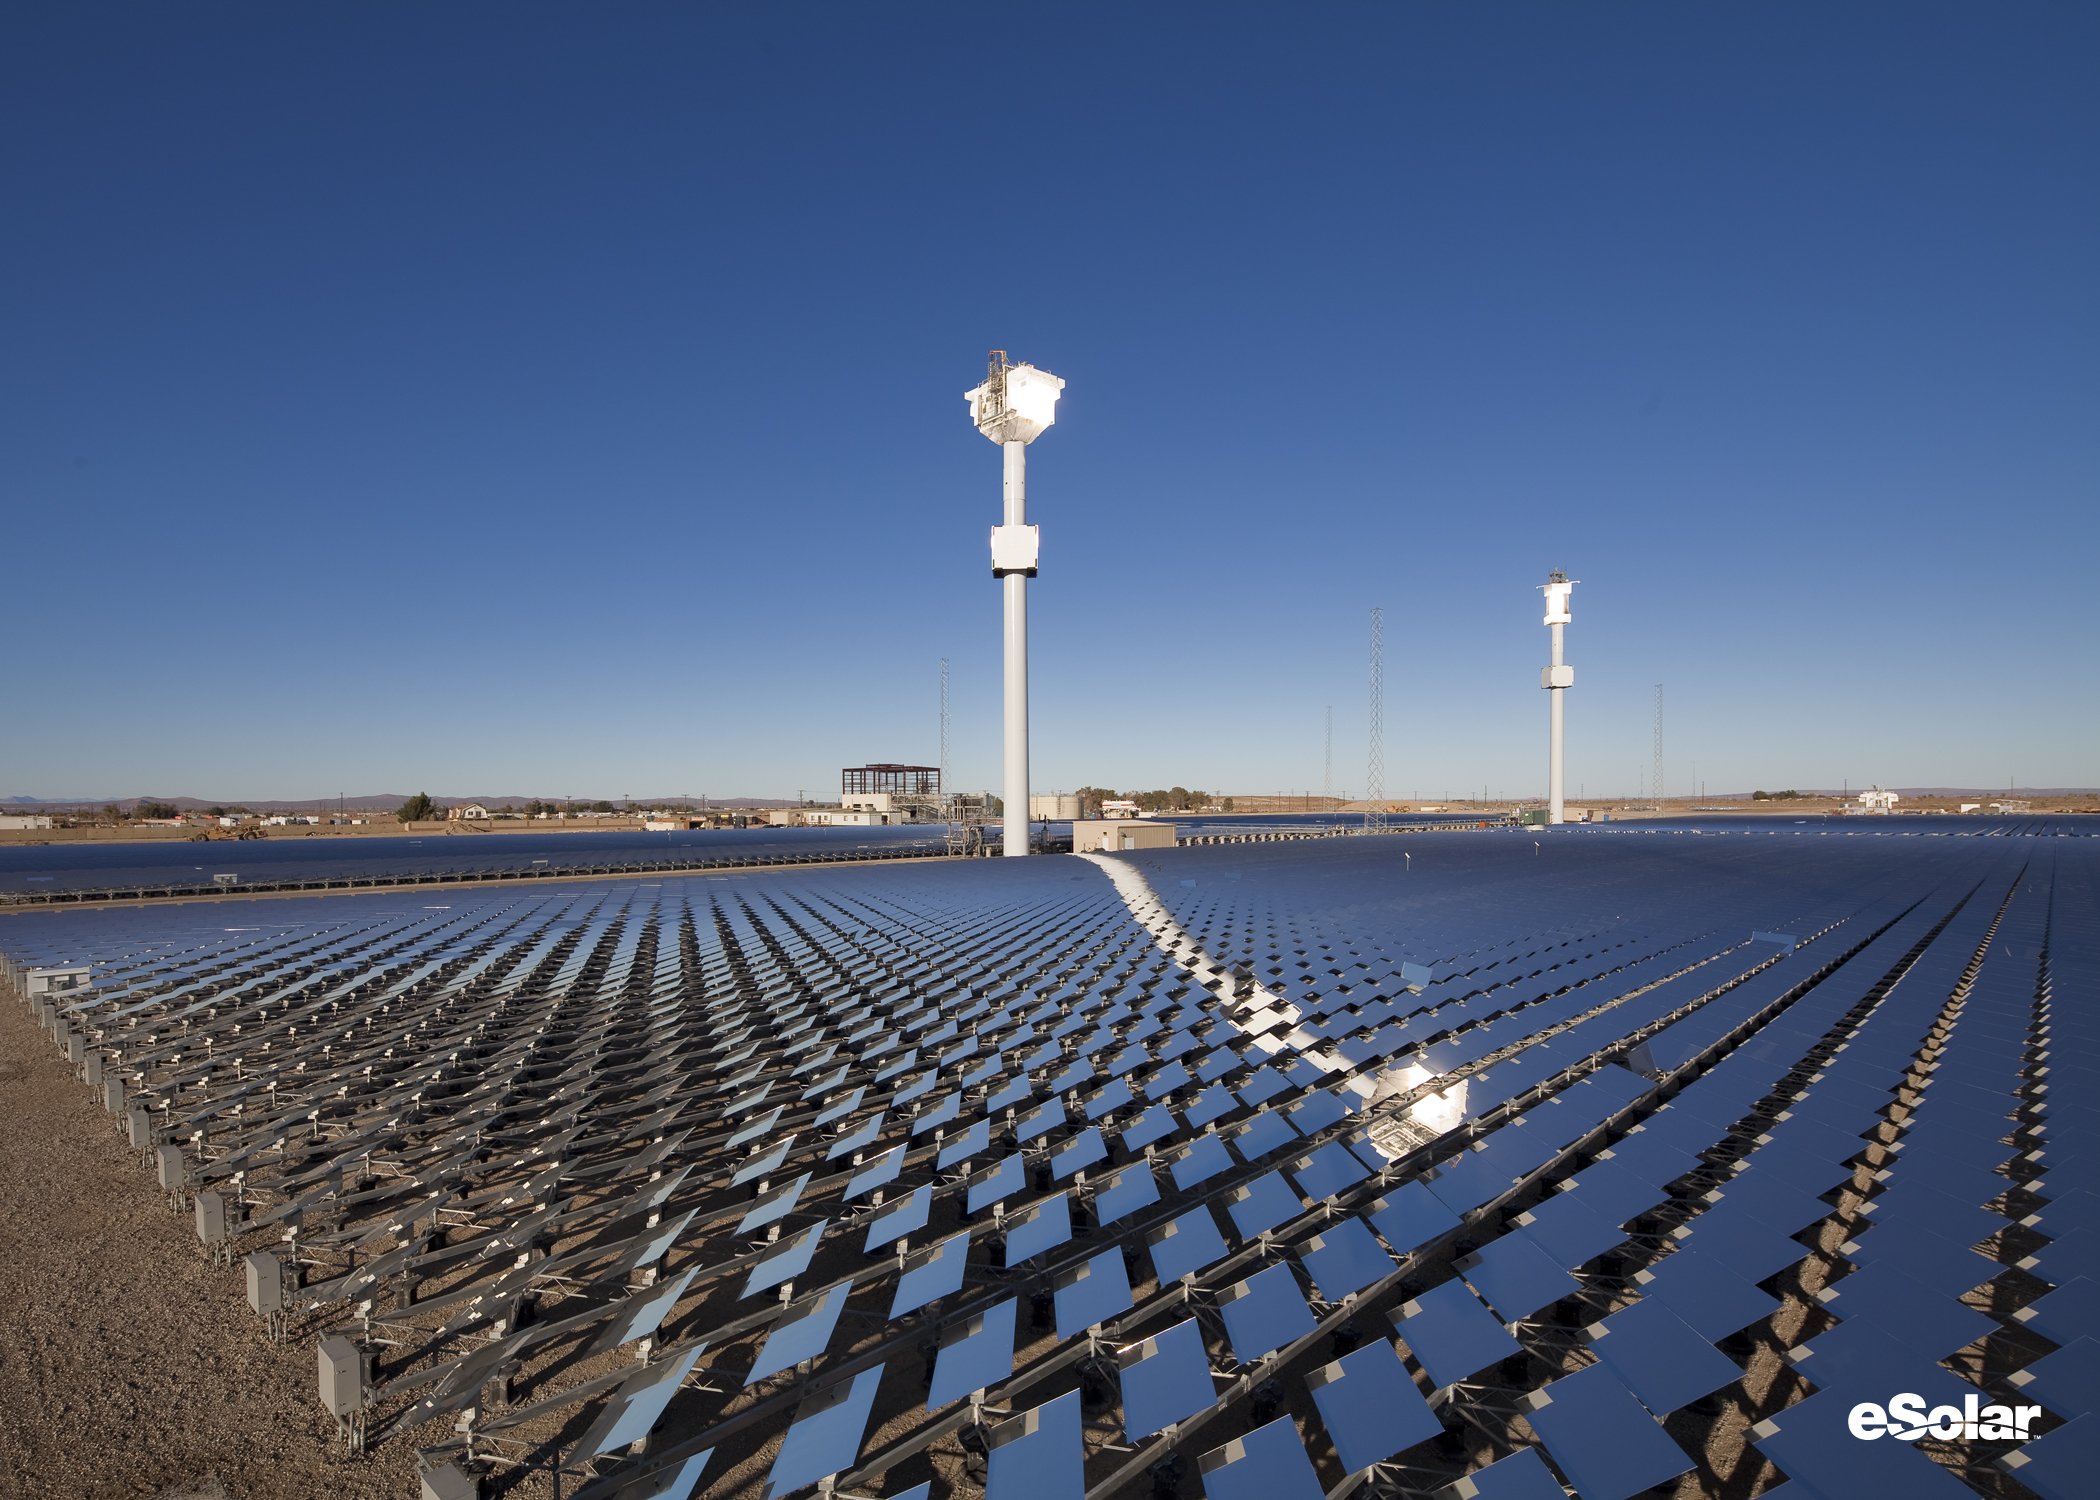 eSolar to focus on Concentrated Solar Power (CSP) for oil recovery 